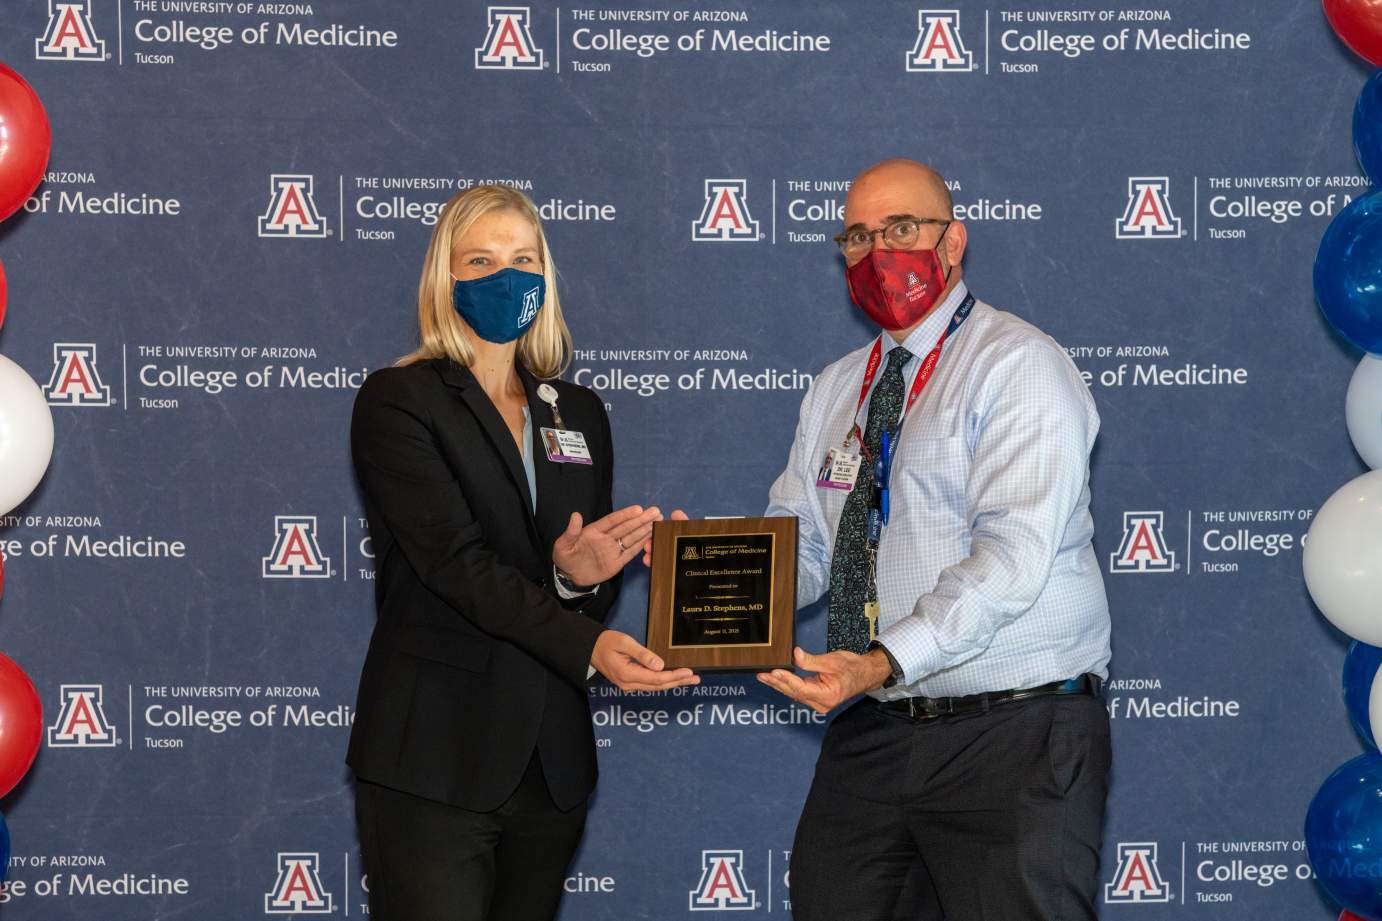   [Dr. Laura Stephens is presented with the Clinical Excellence Award by Dr. Joshua Lee.]